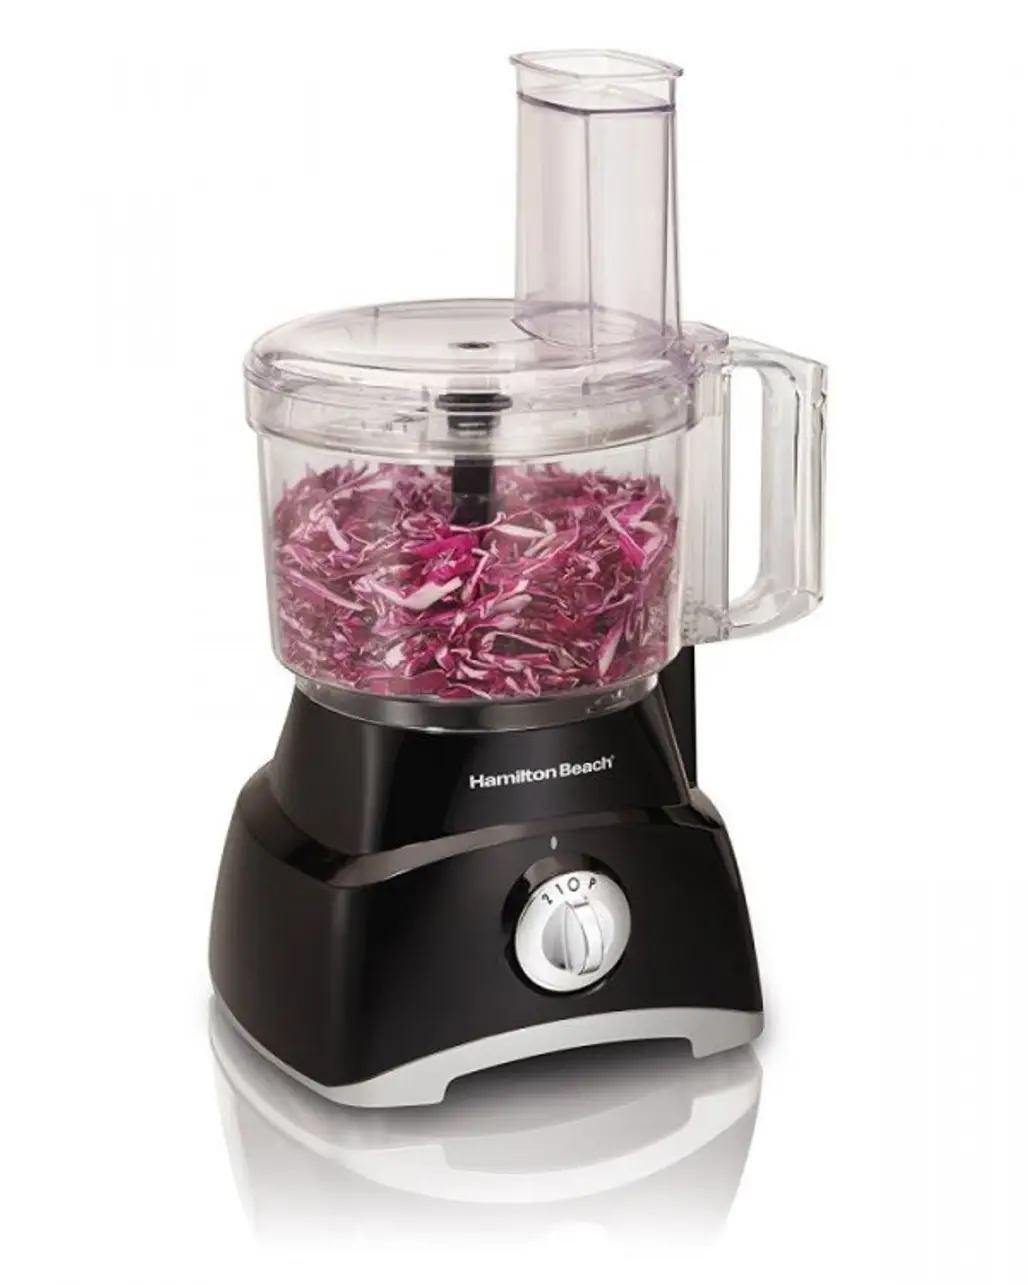 blender, small appliance, kitchen appliance, product, food processor,